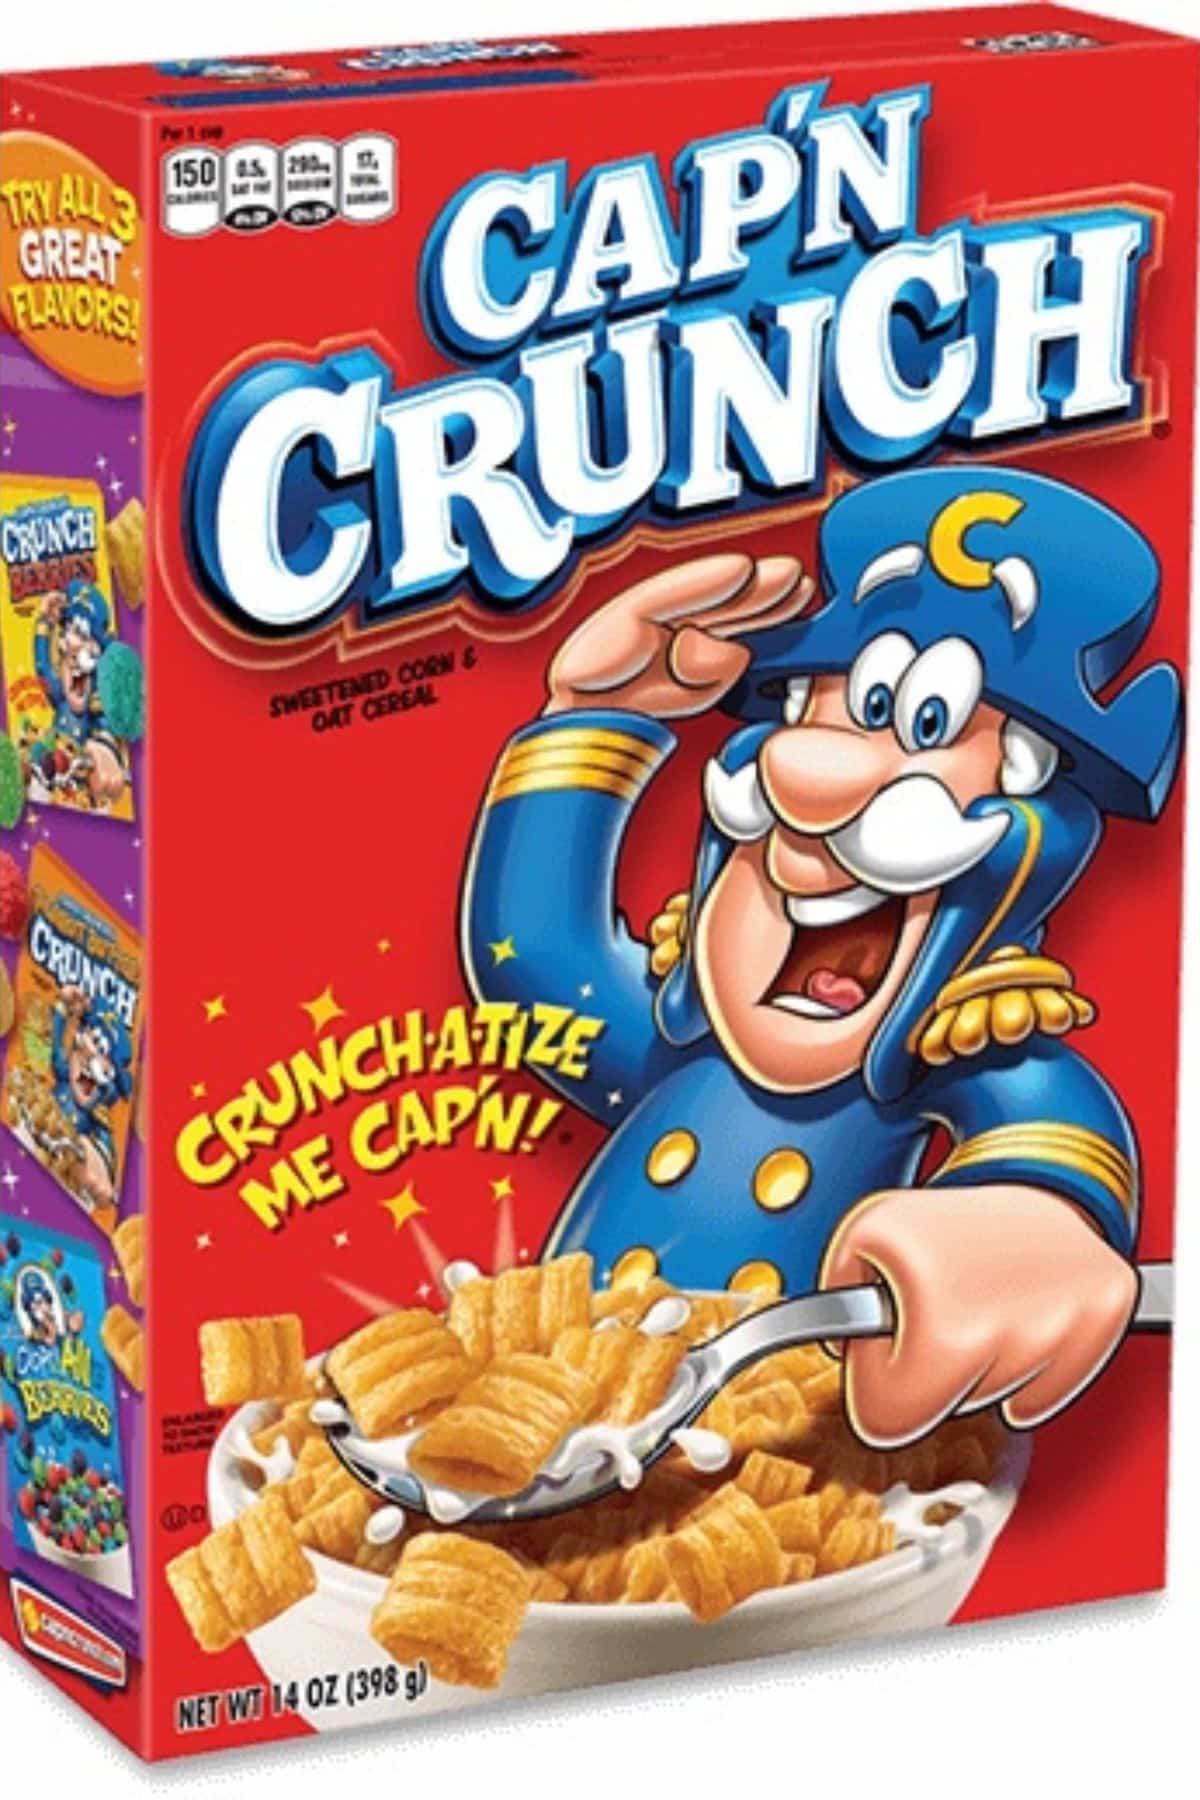 A box of Captain Crunch cereal.